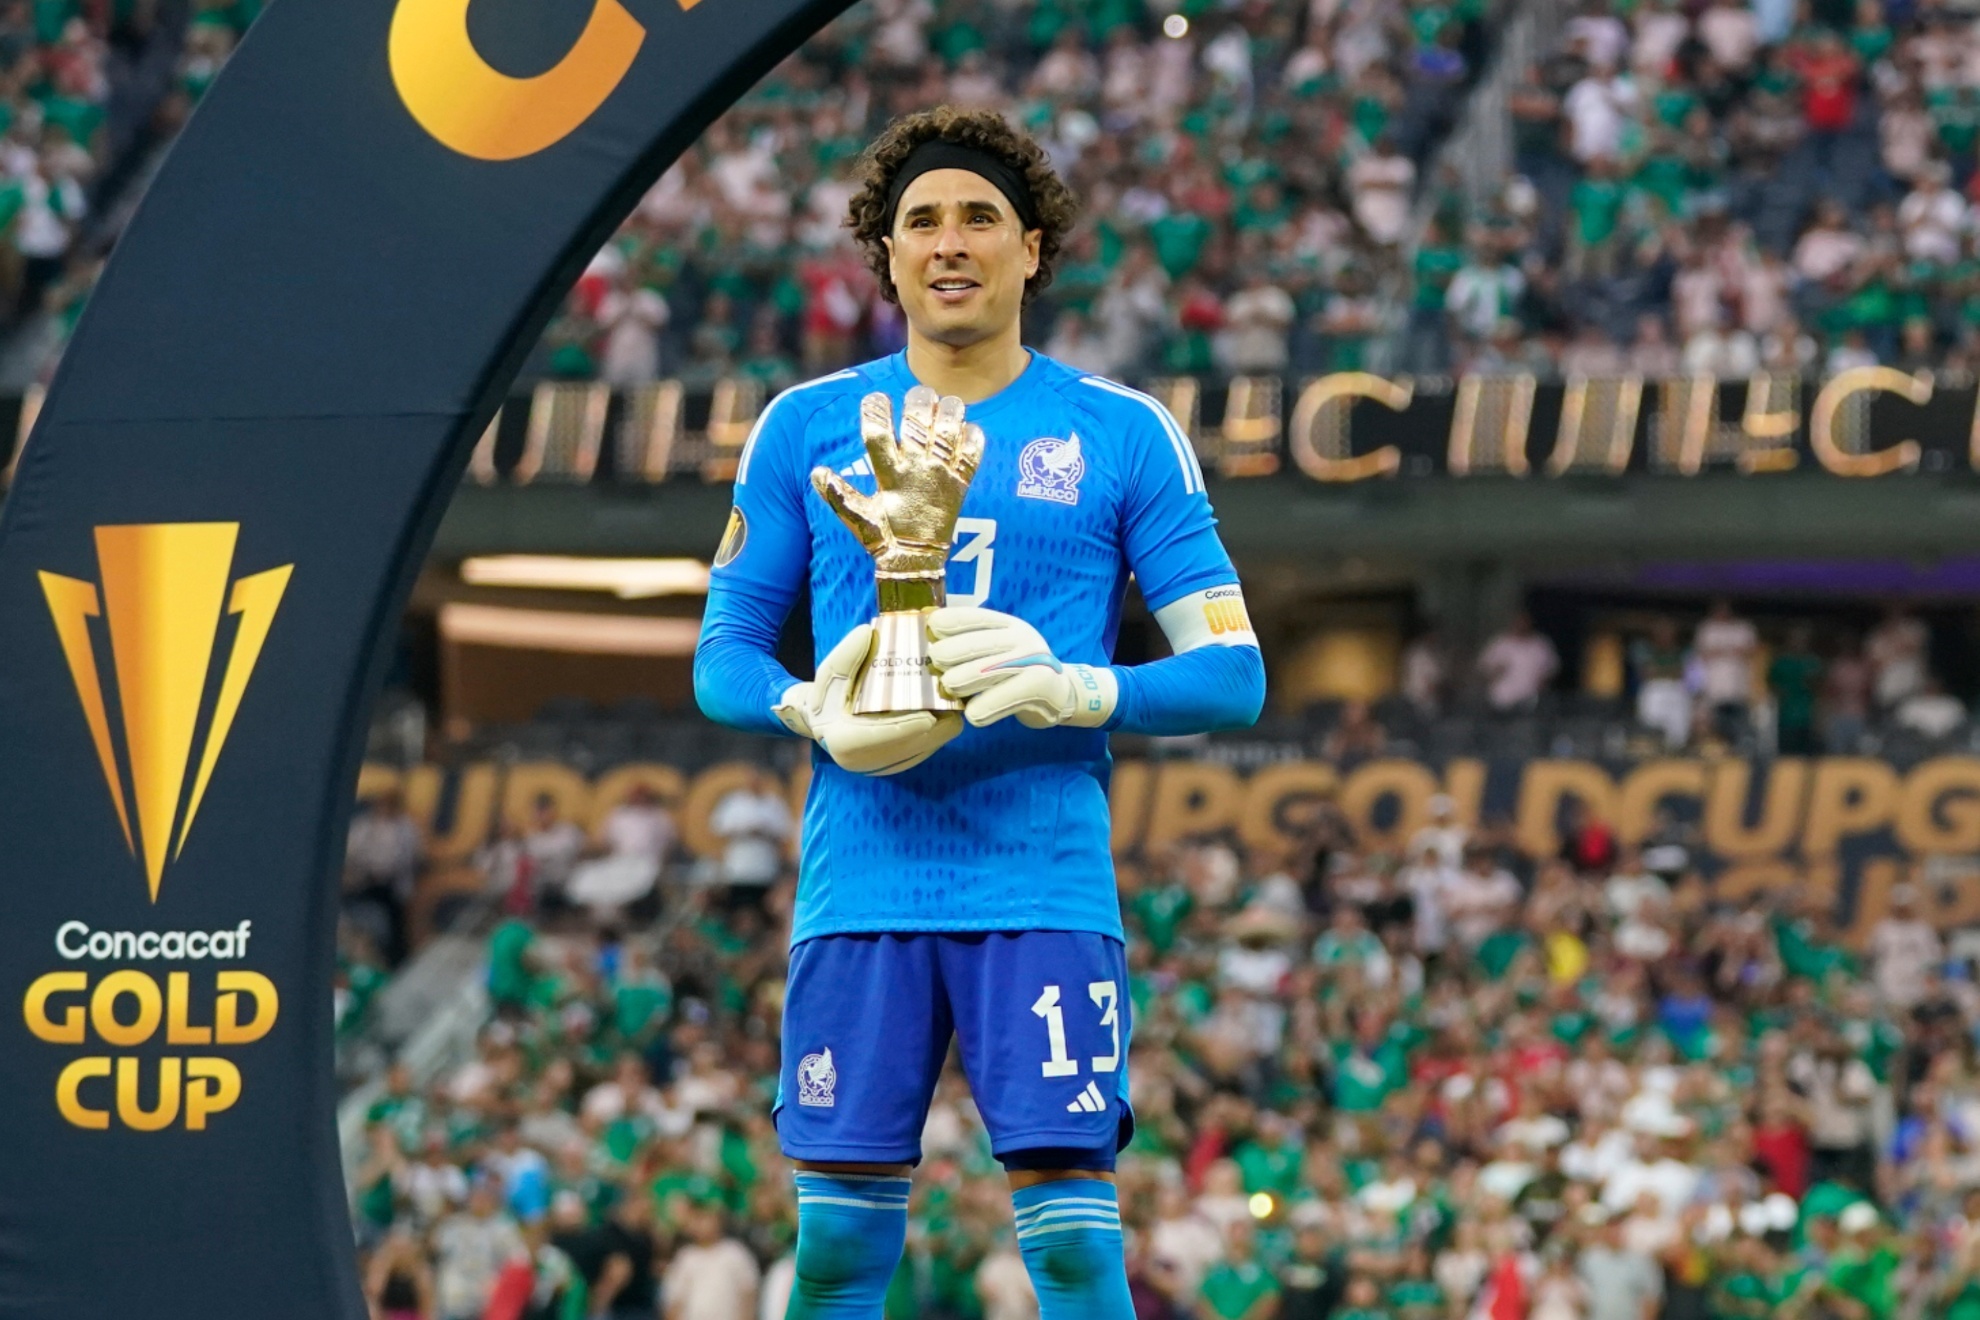 Mexican goalkeeper Guillermo Ochoa won the 2023 CONCACAF Gold Cup Golden Glove